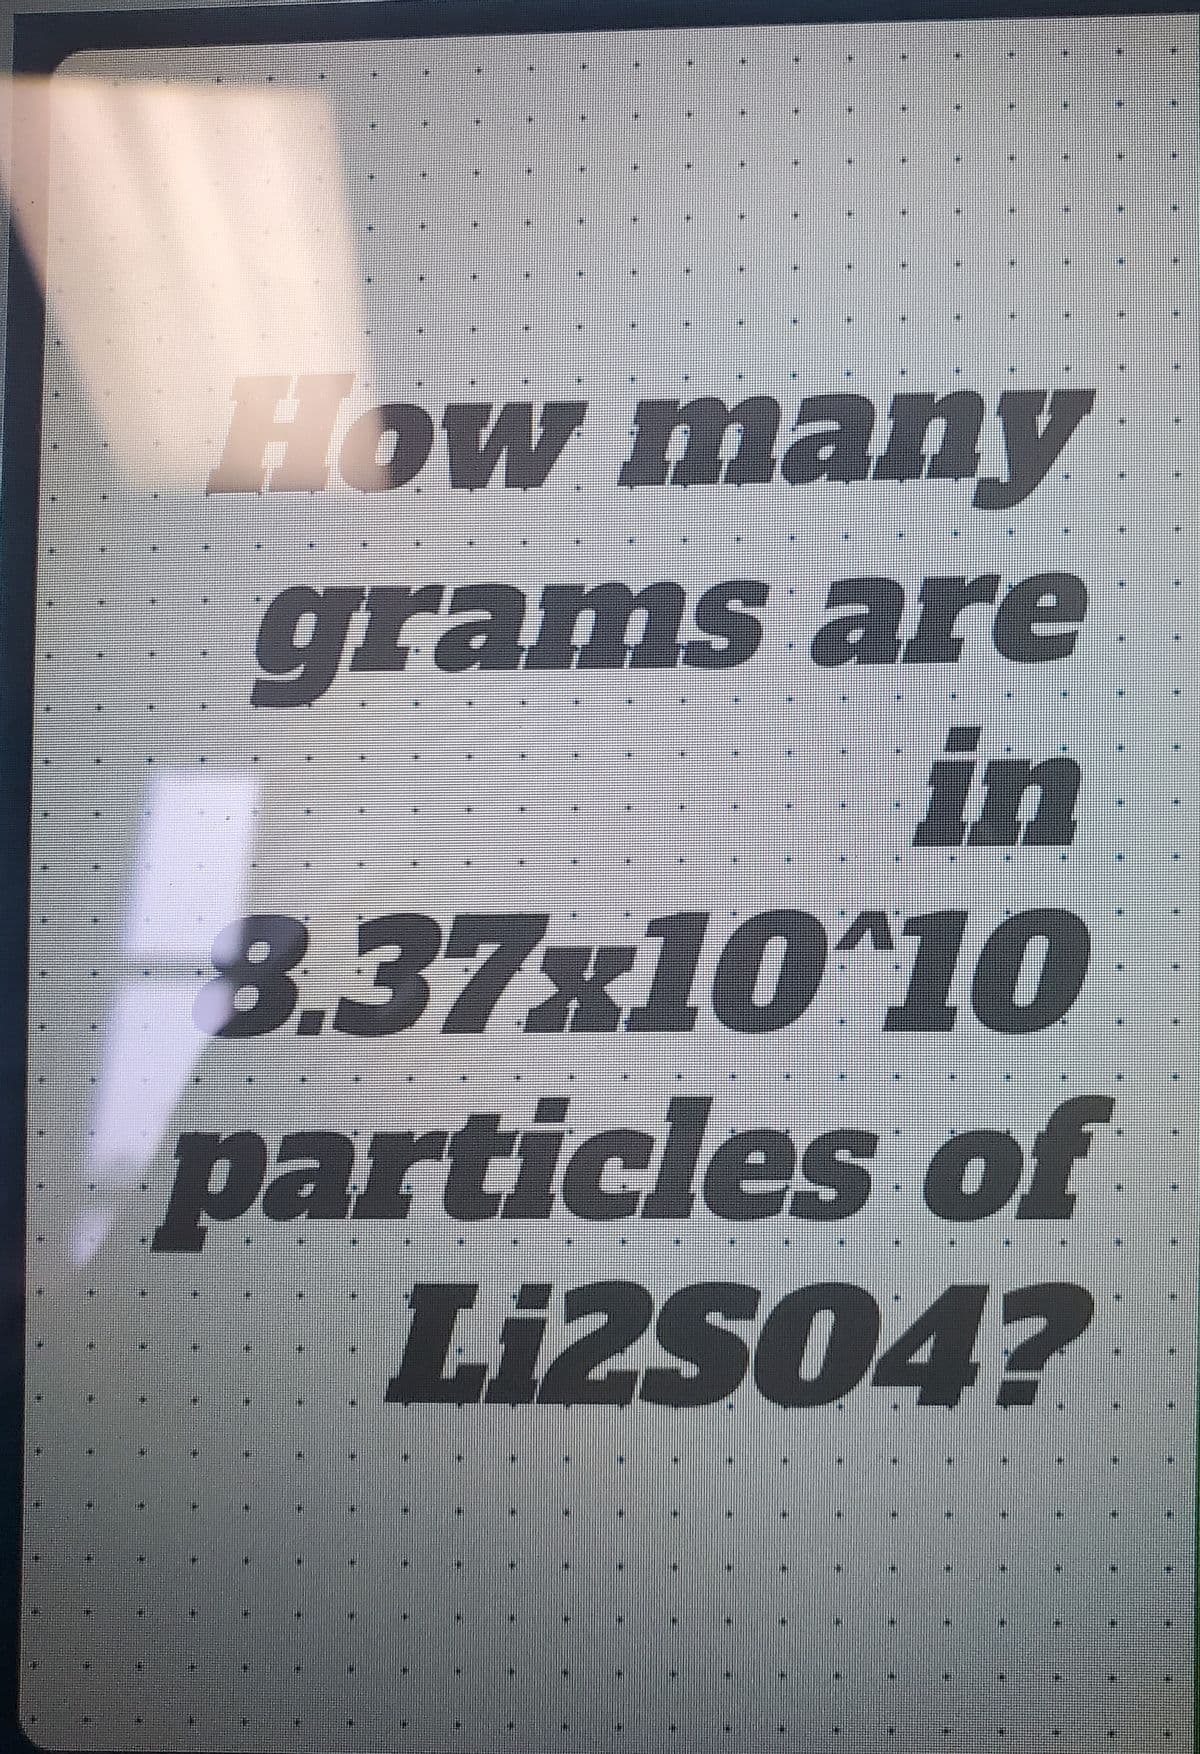 P
H
EER
E
How many
grams are
in
3.37x10^10
particles of
Li2SO4?